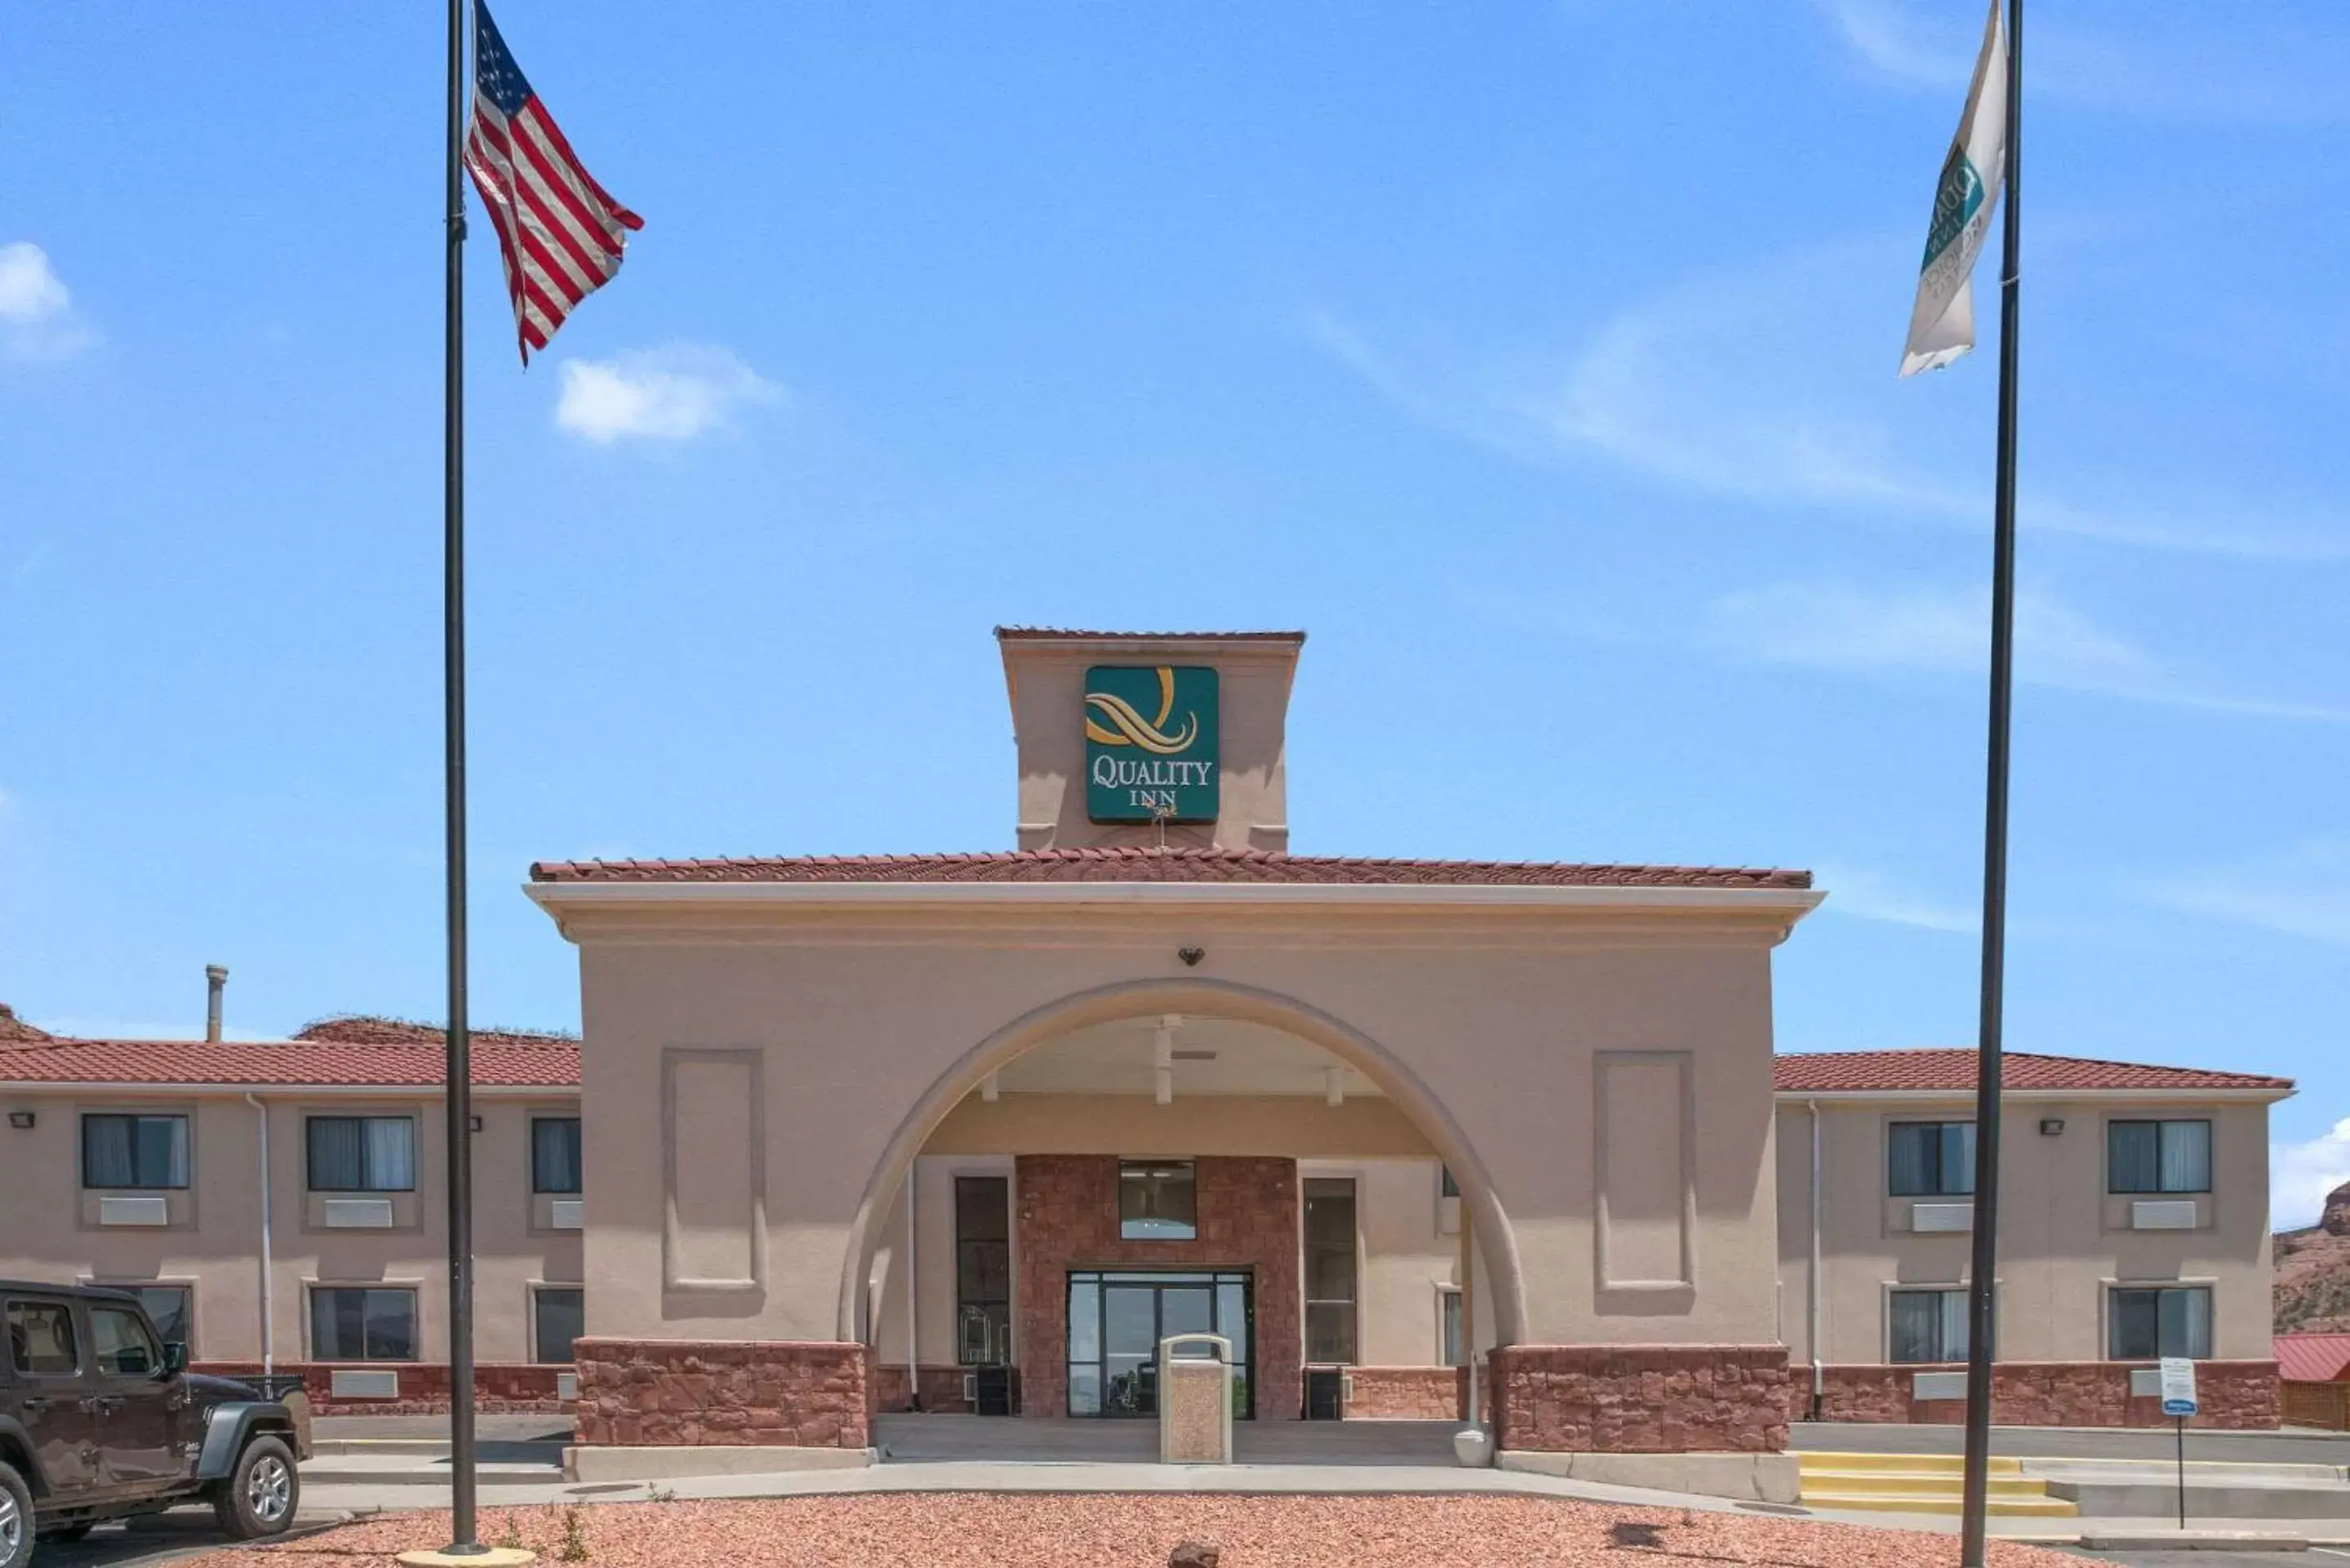 Property Building in Quality Inn Kanab National Park Area